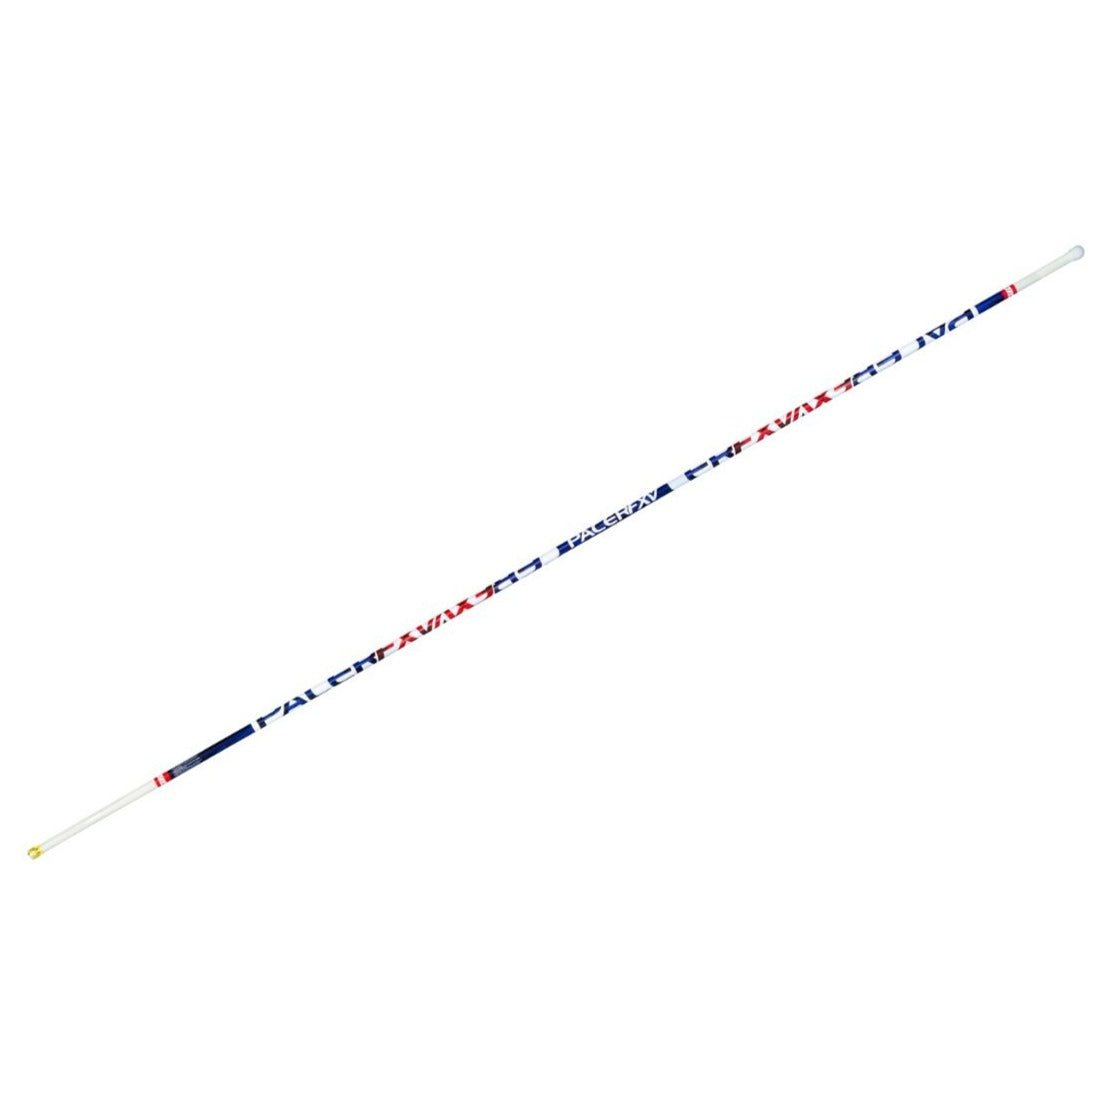 Gill Pacer FX Vaulting Pole